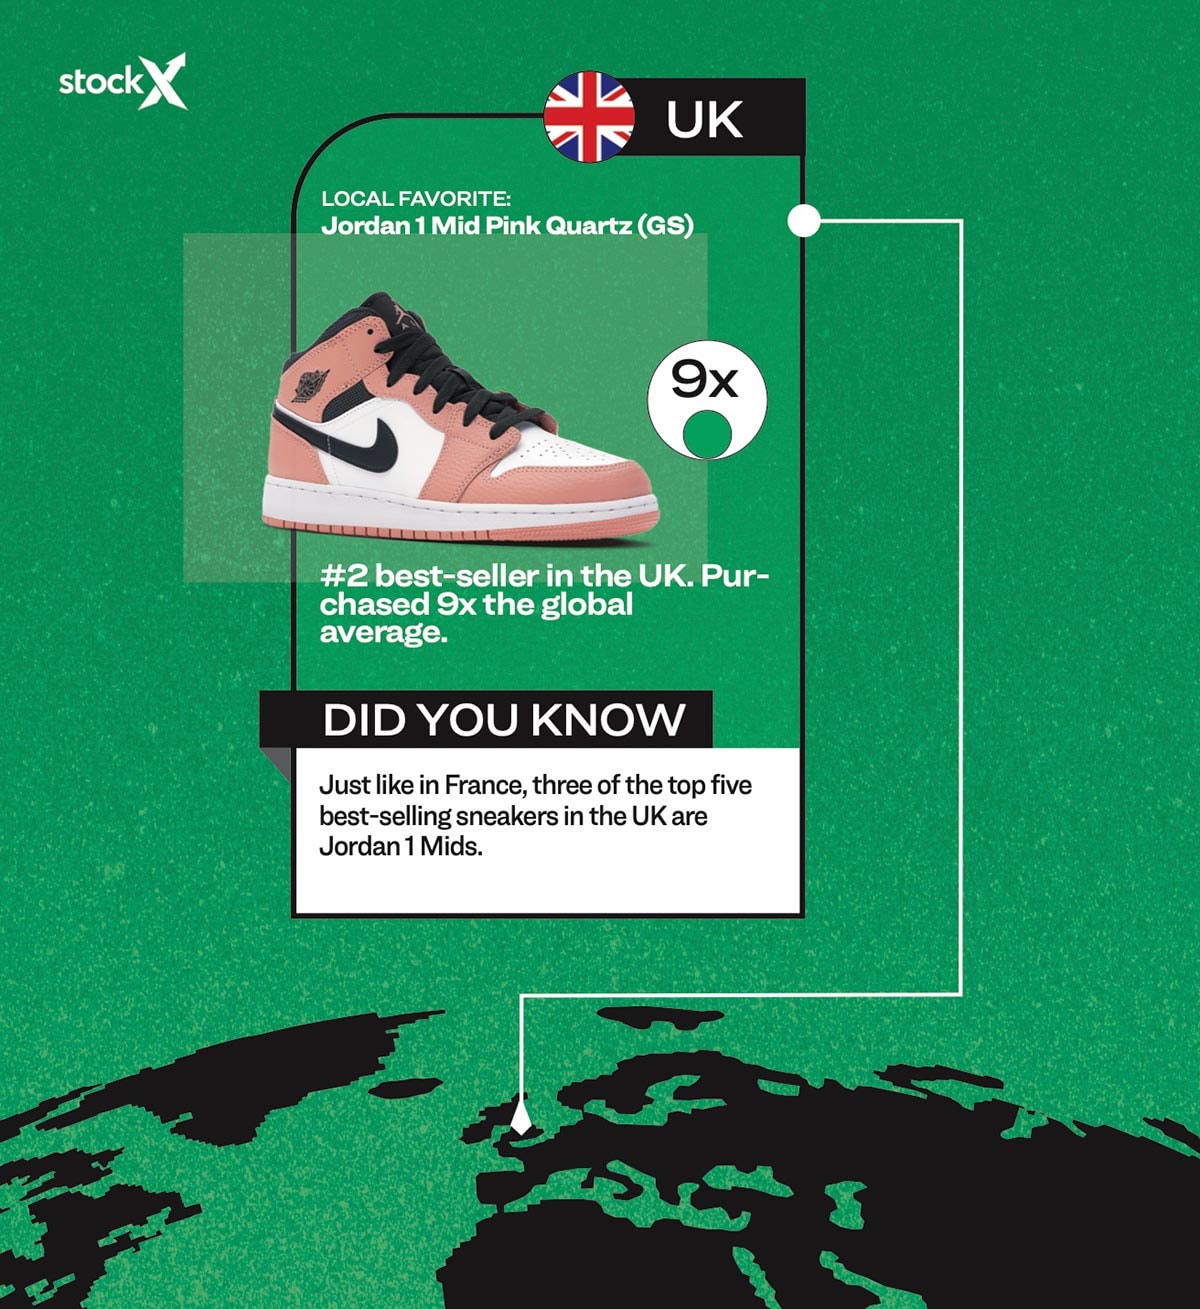 stockx gs meaning